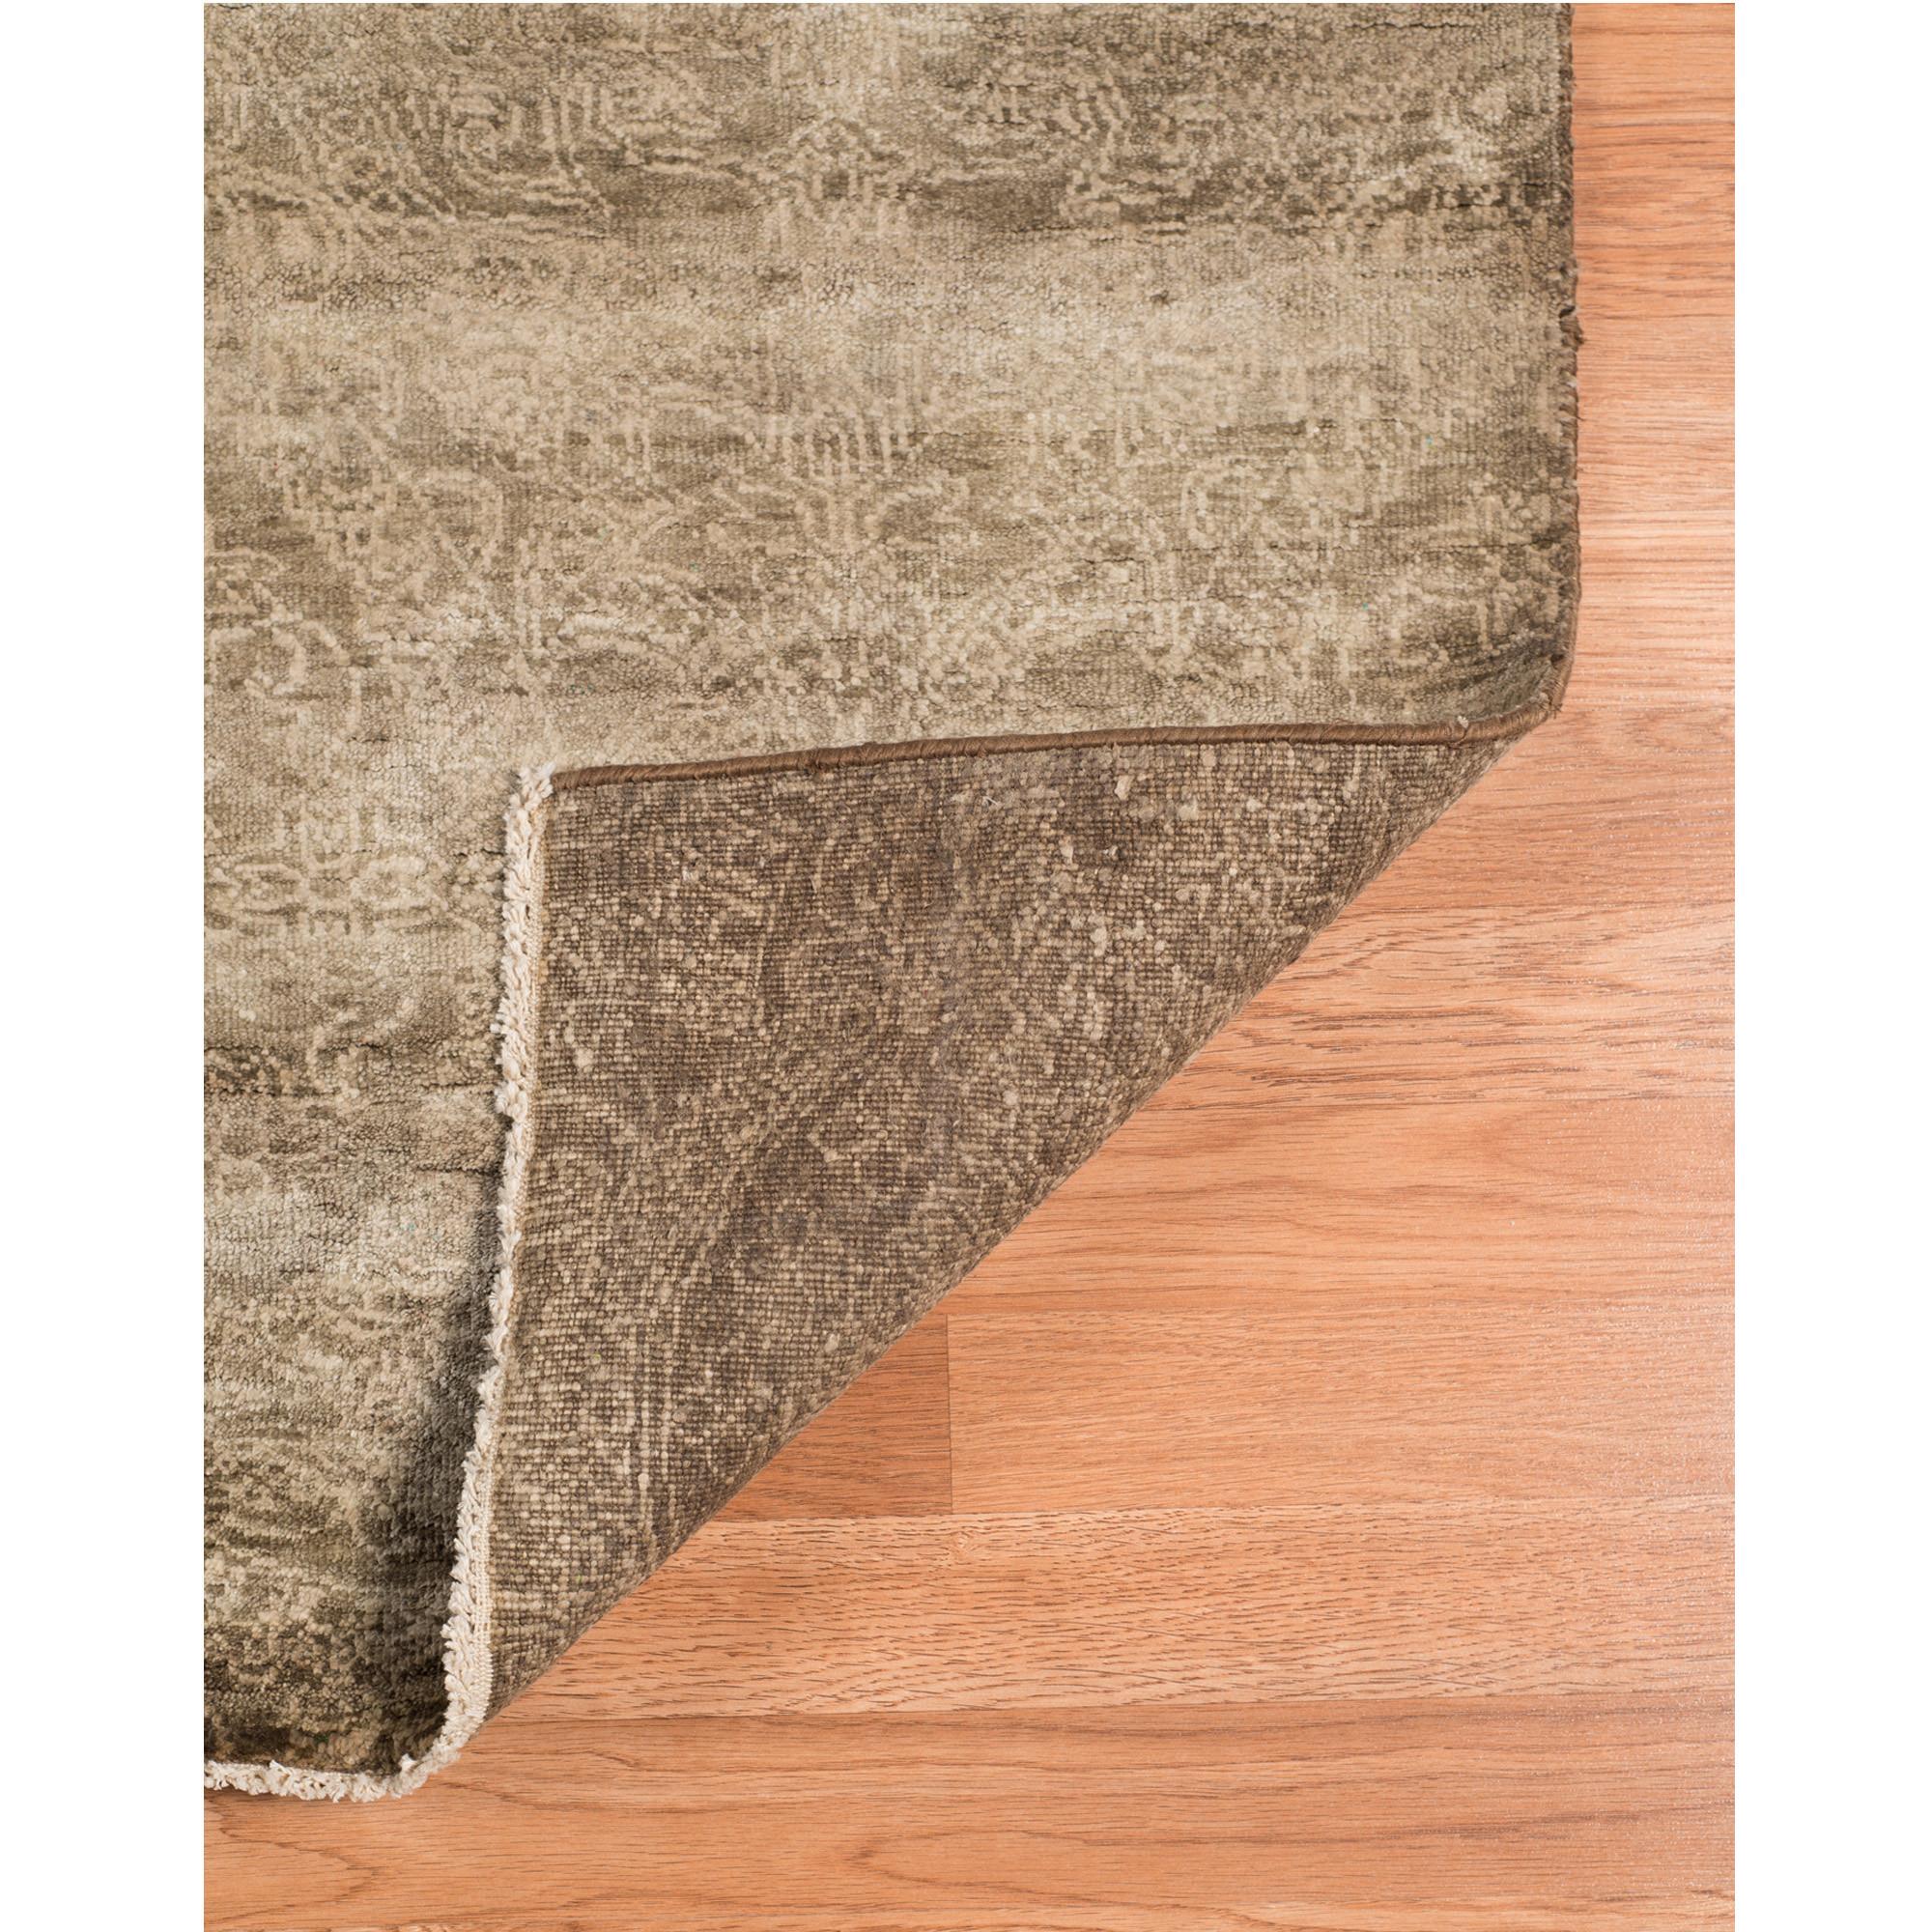 8' X 10' Ombre Brown Distressed Paisley Handmade Area Rug